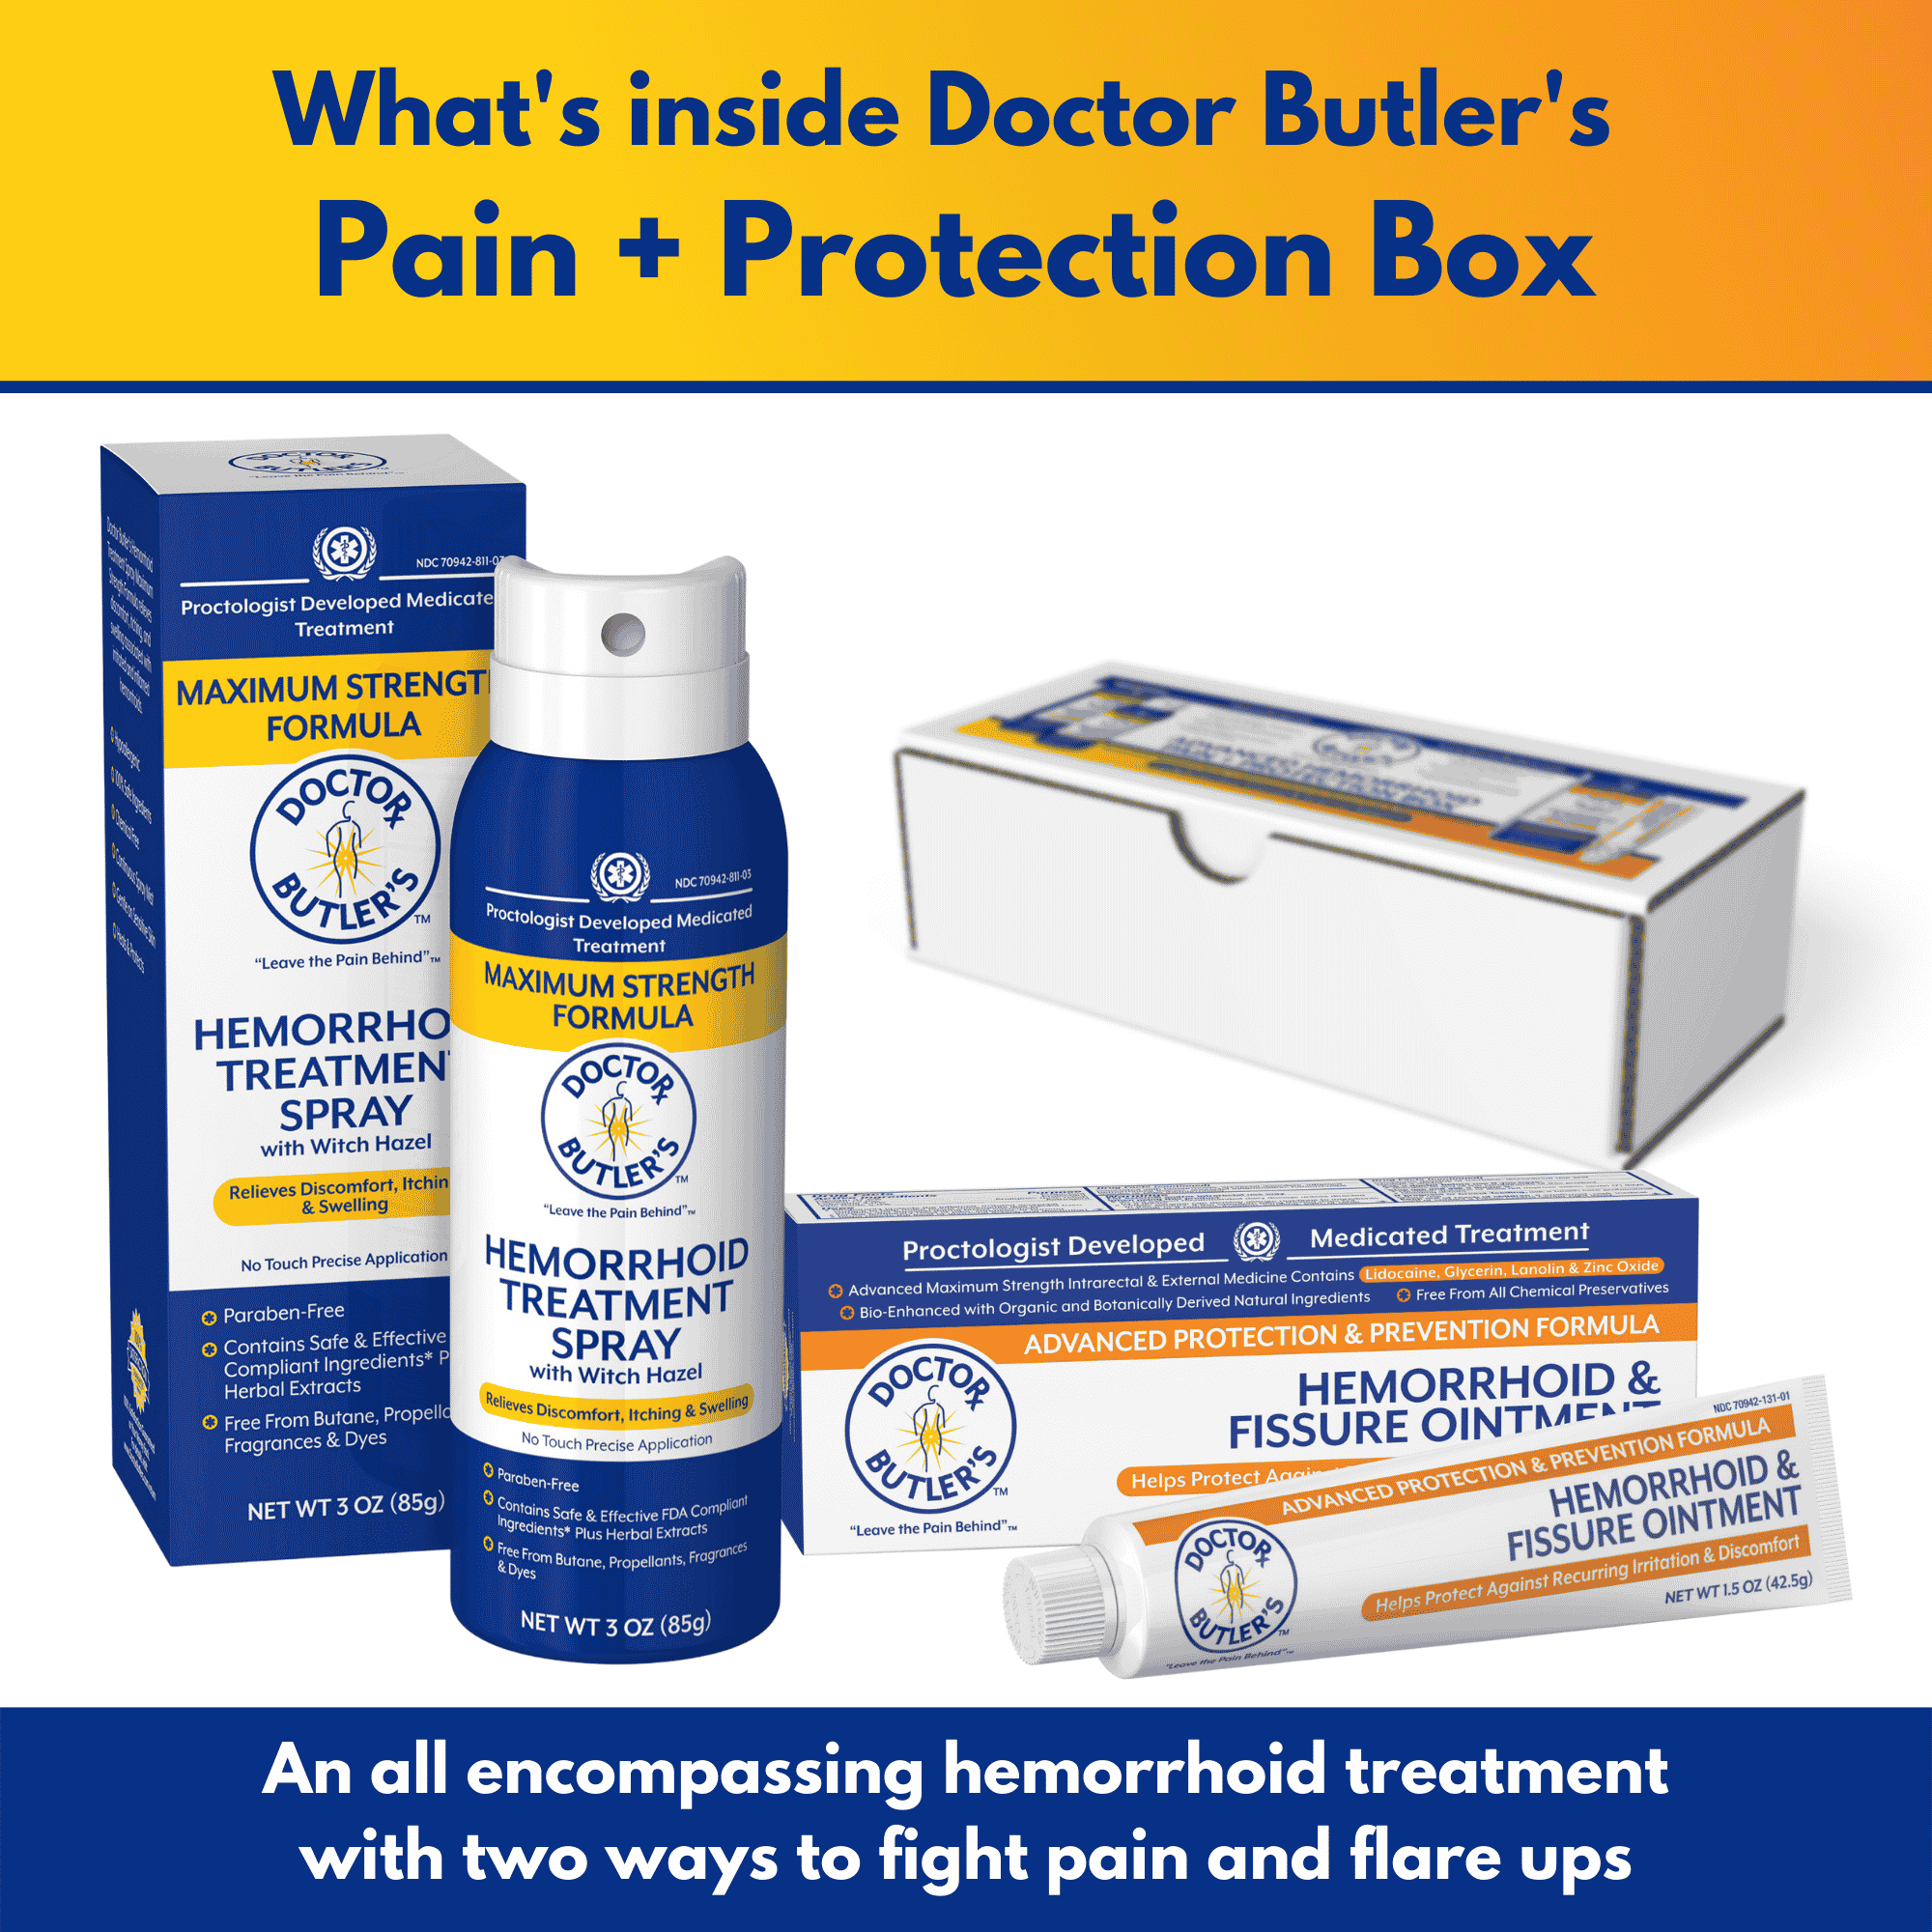 Advanced Hemorrhoid Pain & Protection Box by Doctor Butler's